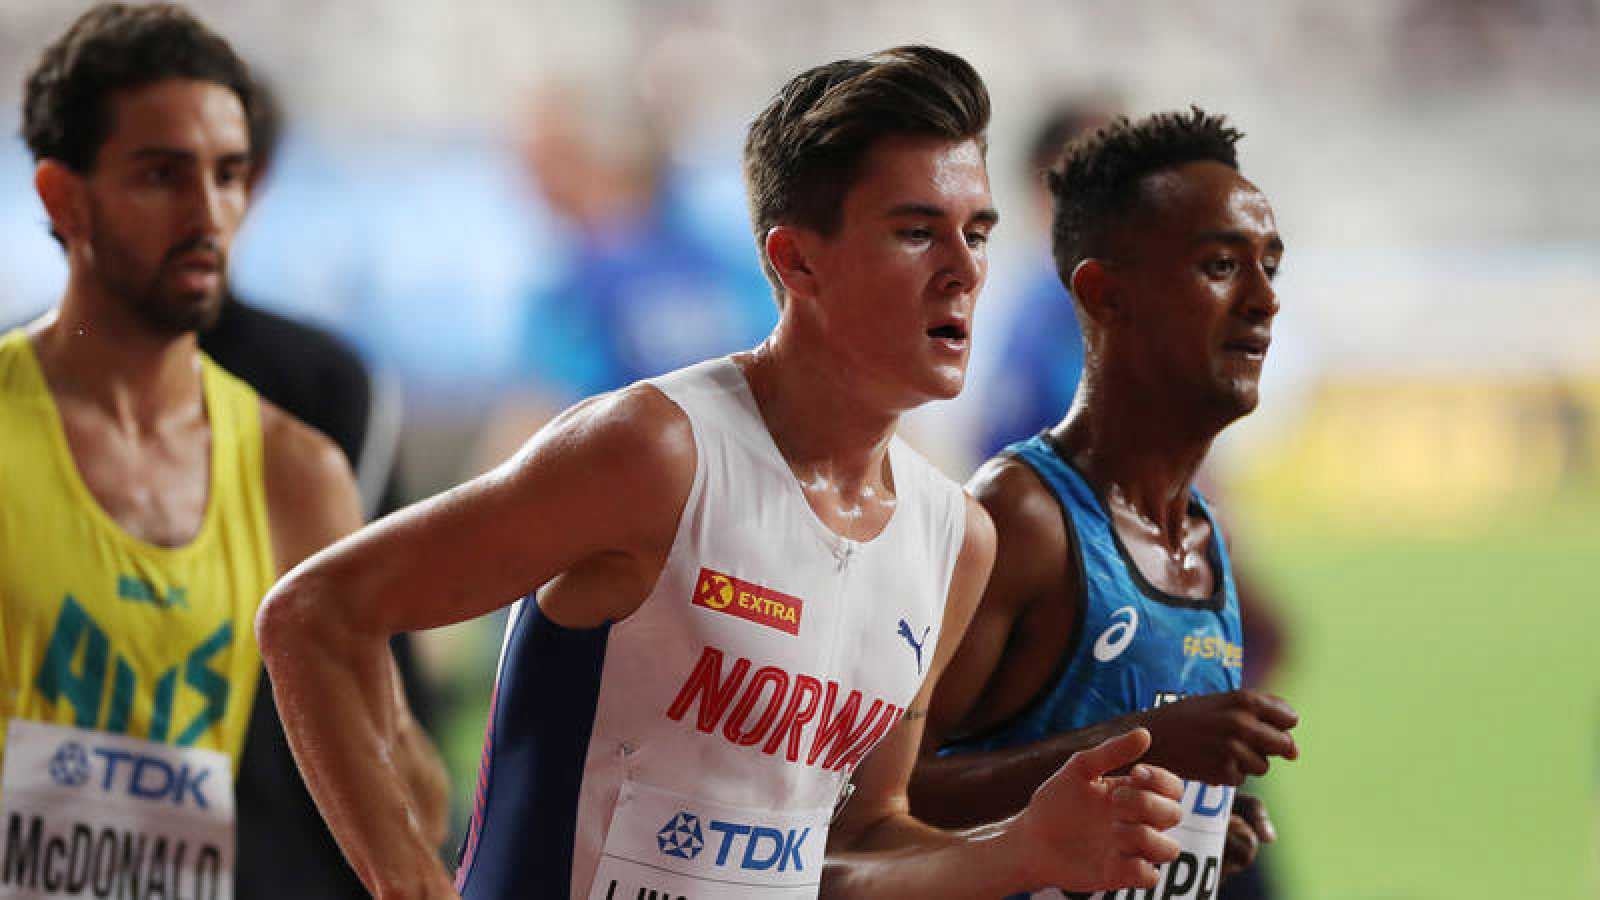 Jakob Ingebrigtsen says that the 1500m is the most painful race